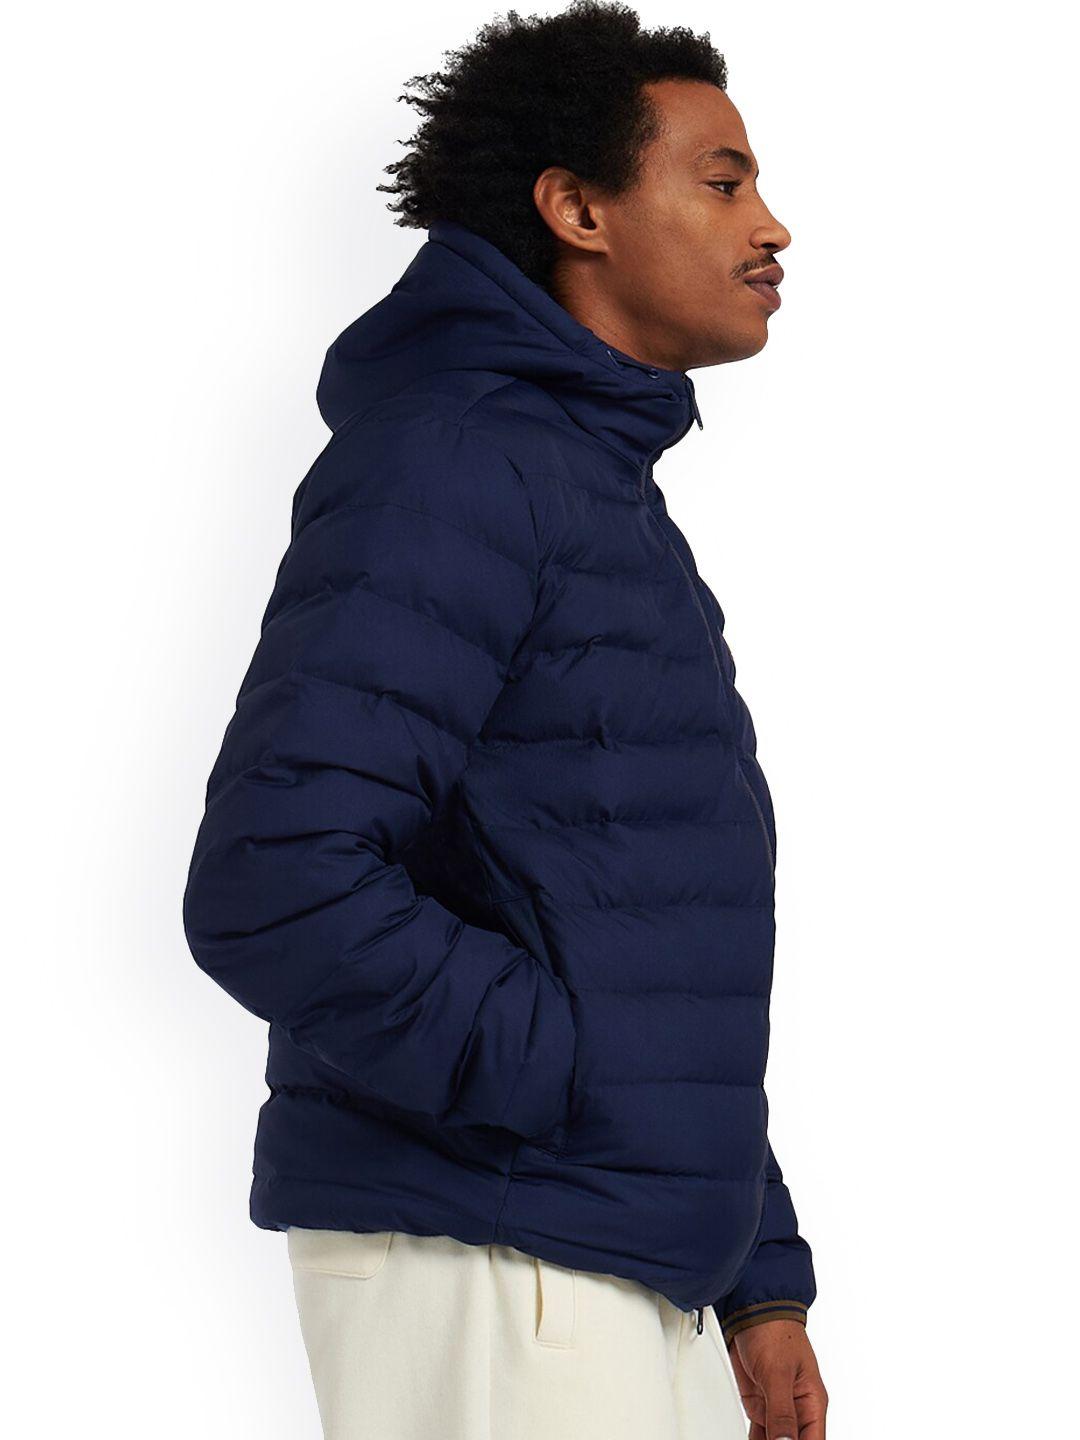 fred perry men navy blue hooded puffer jacket